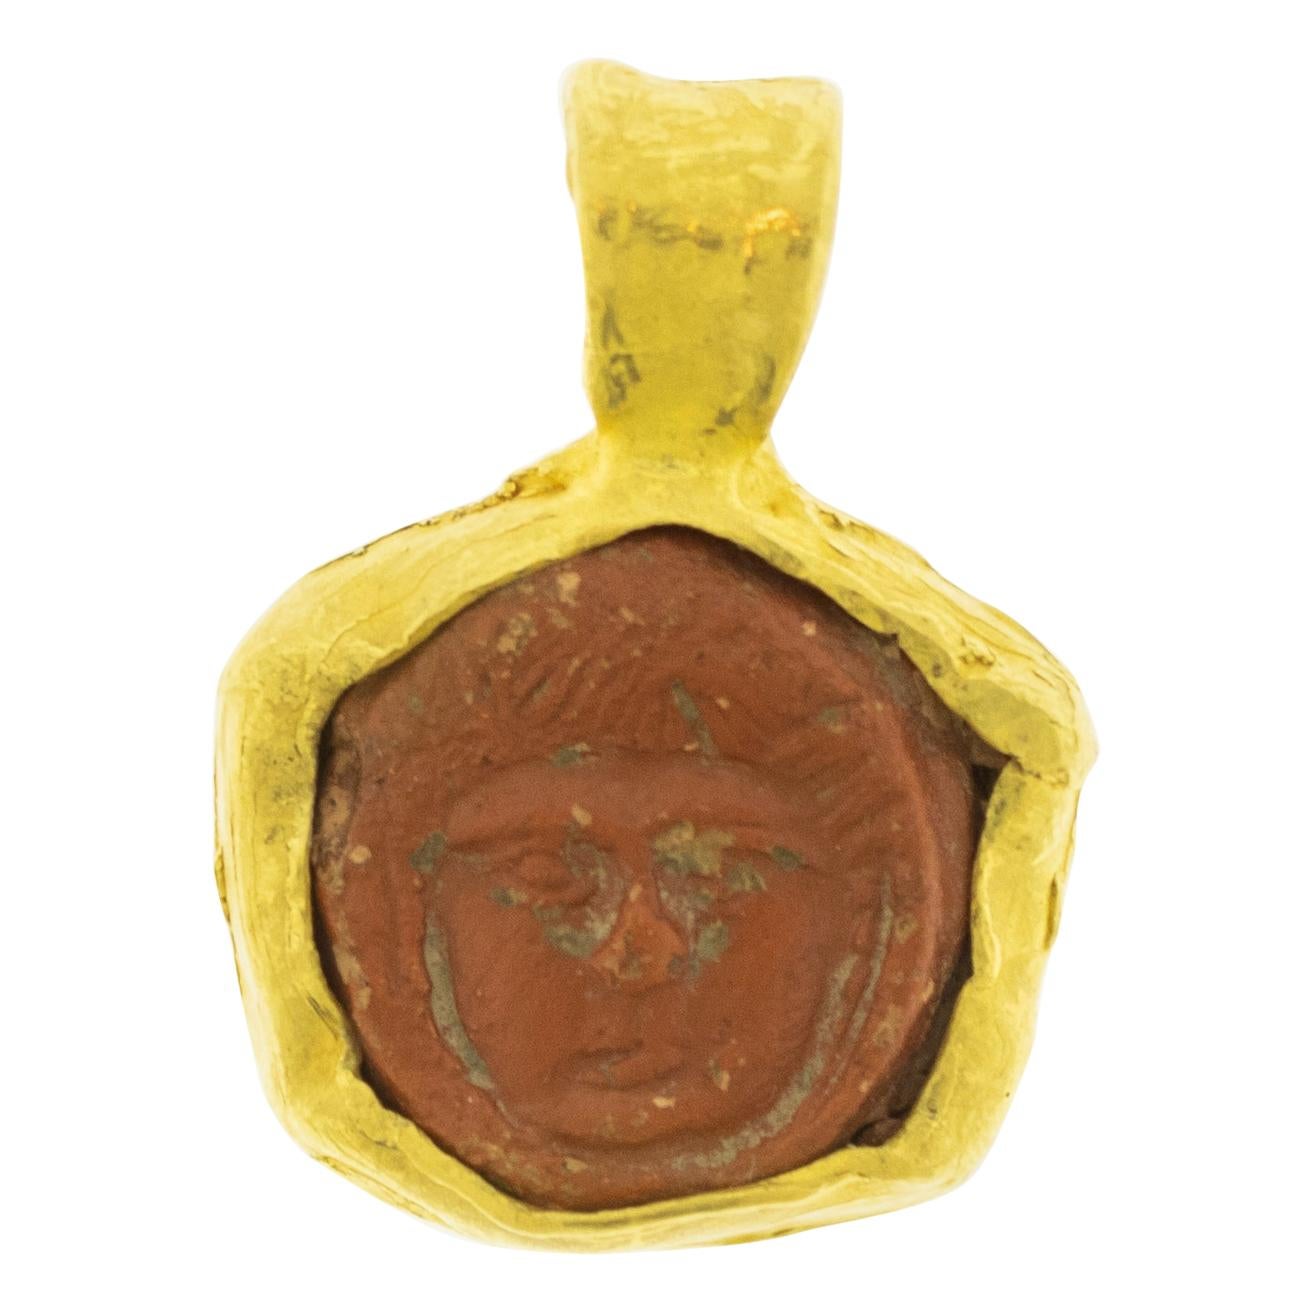 Ancient Clay Artifact Mounted in 22 Karat Gold Pendant For Sale